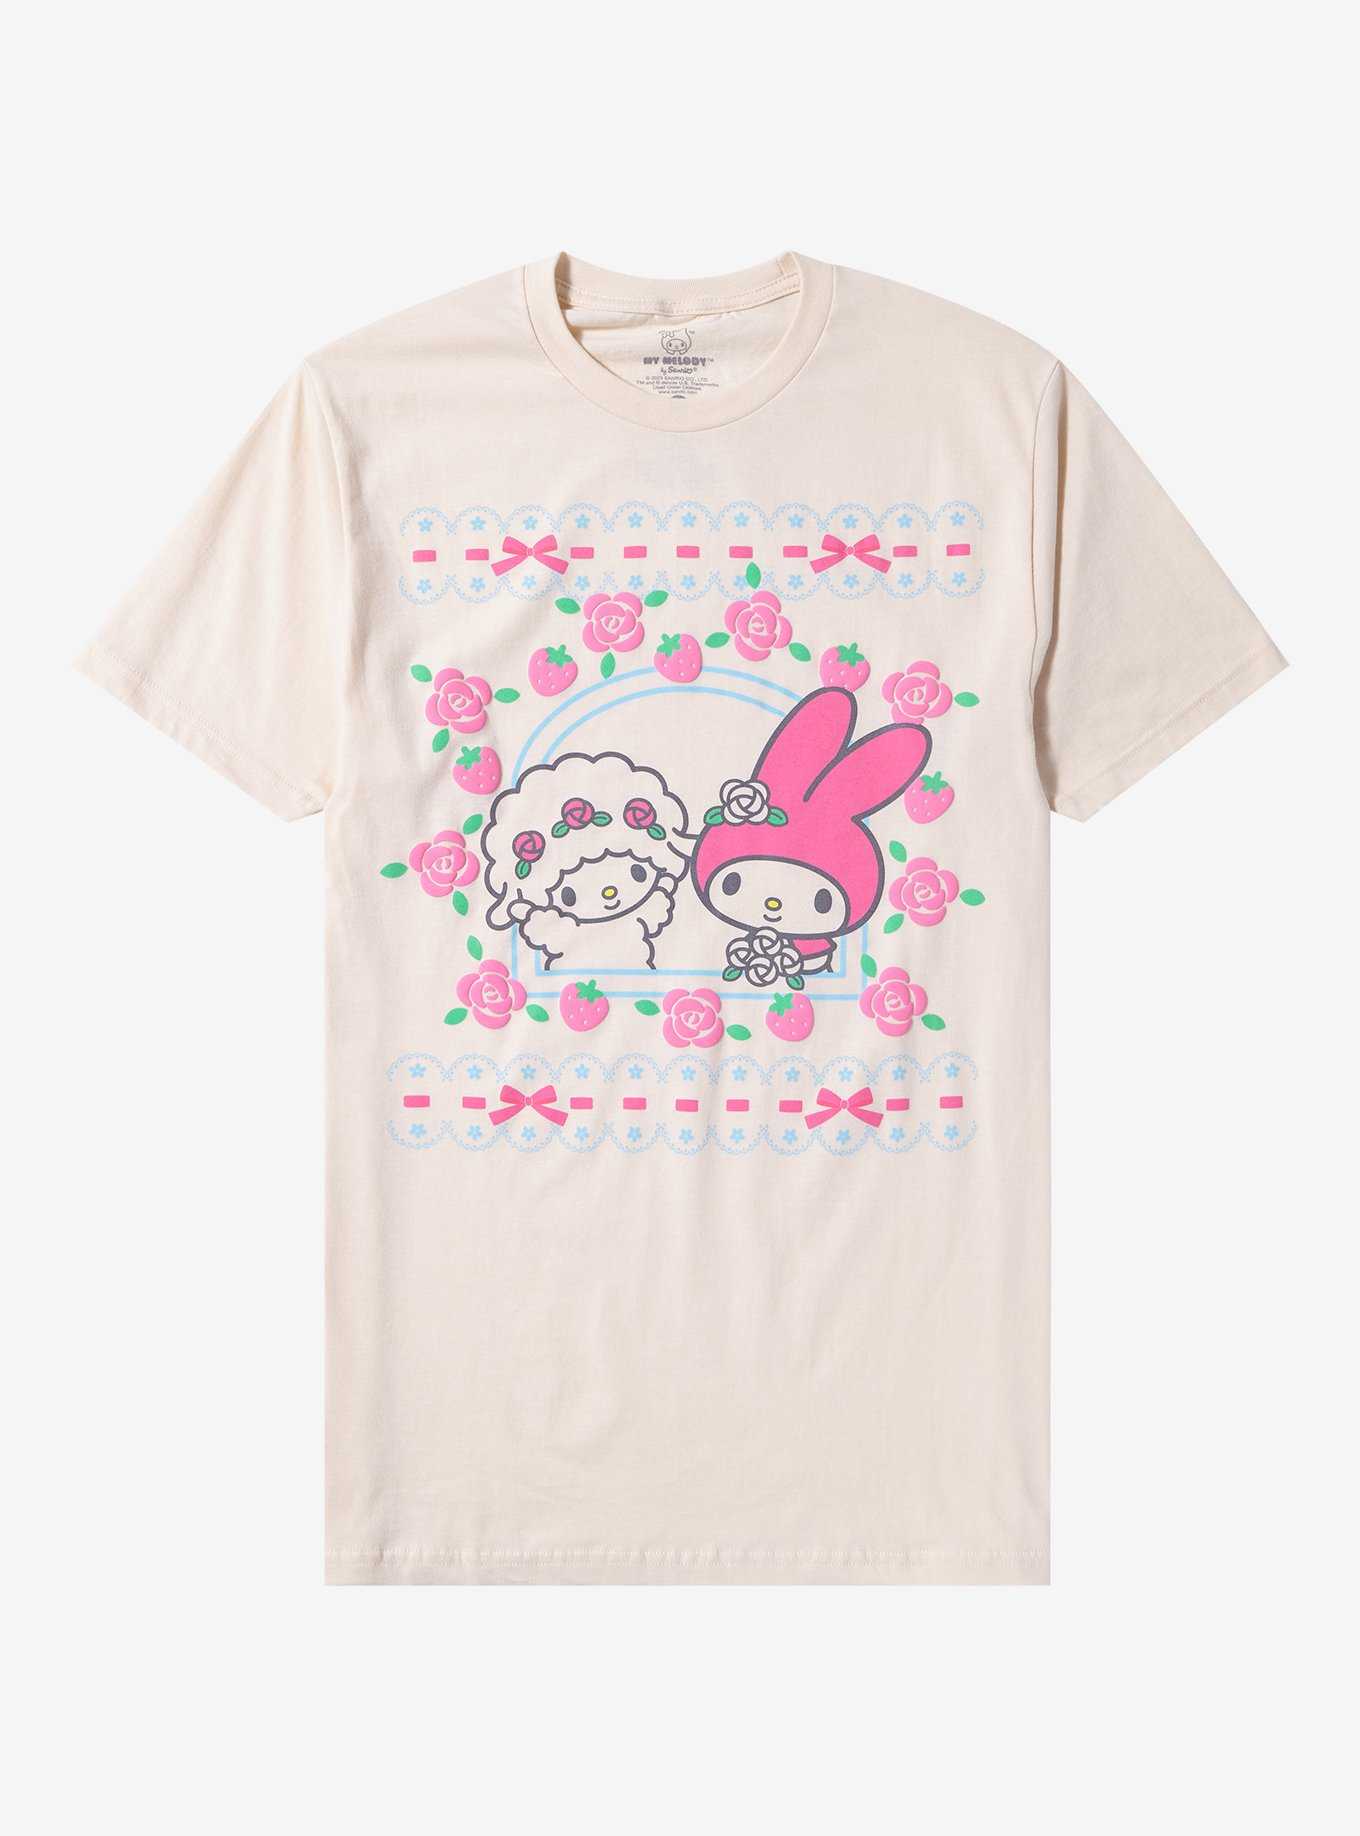 My Melody & My Sweet Piano Flower Coquette Boyfriend Fit Girls T-Shirt, , hi-res